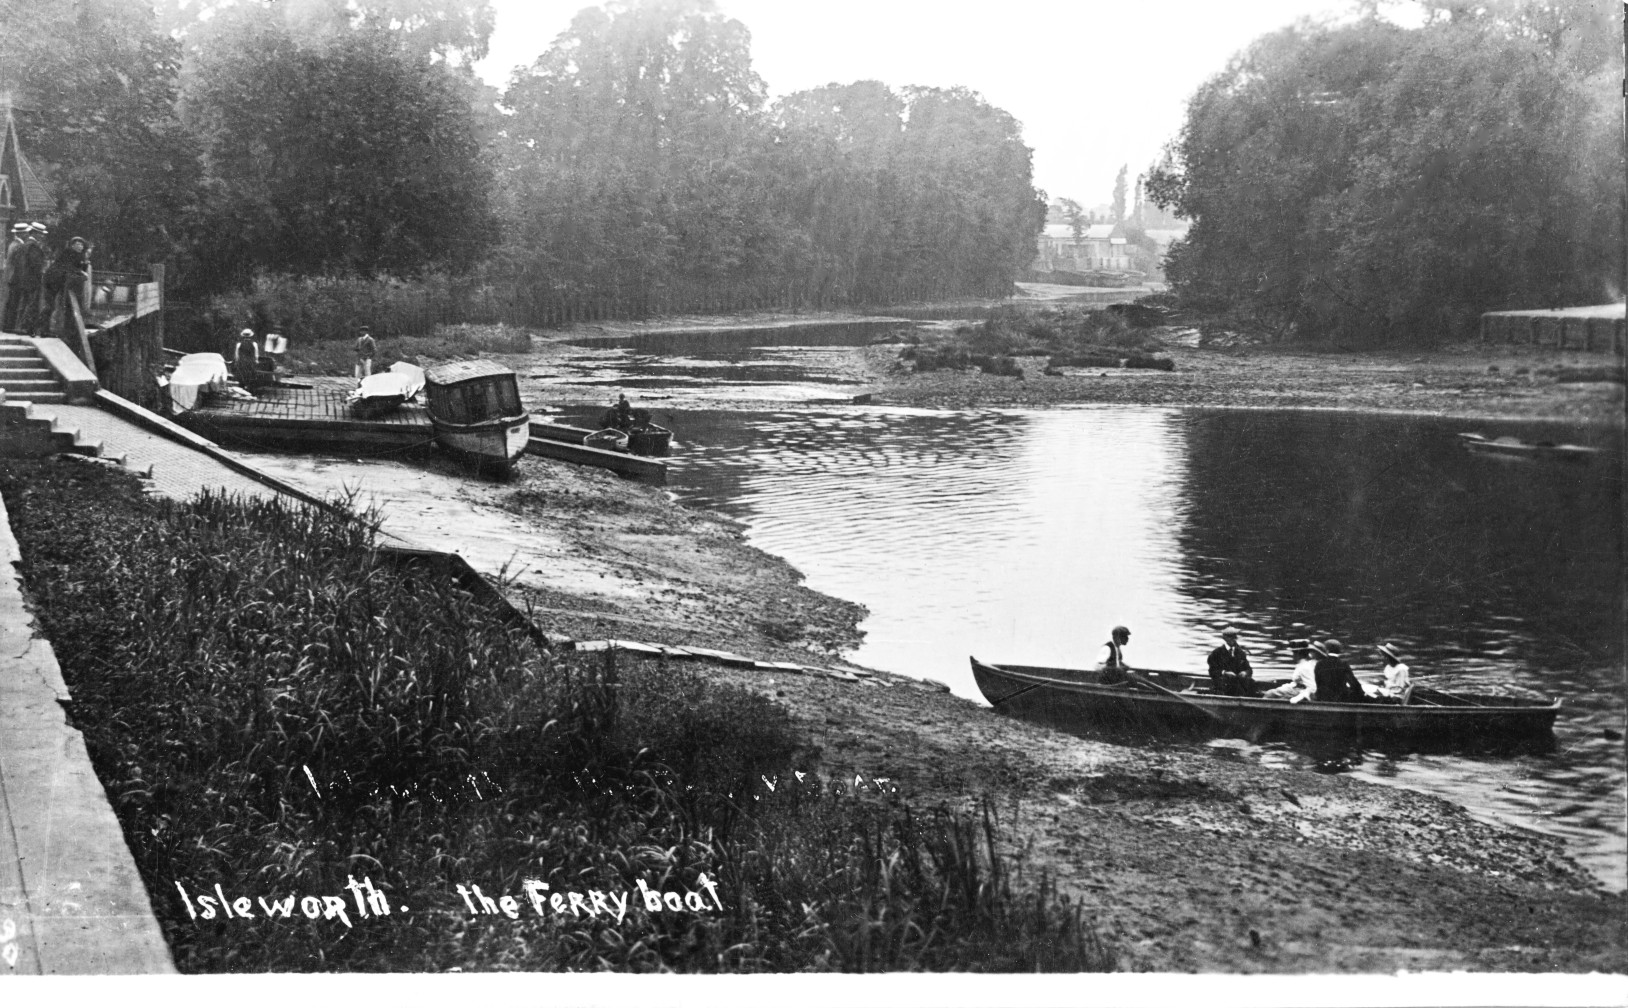 Isleworth Ferry at Railshead,ferry,river view